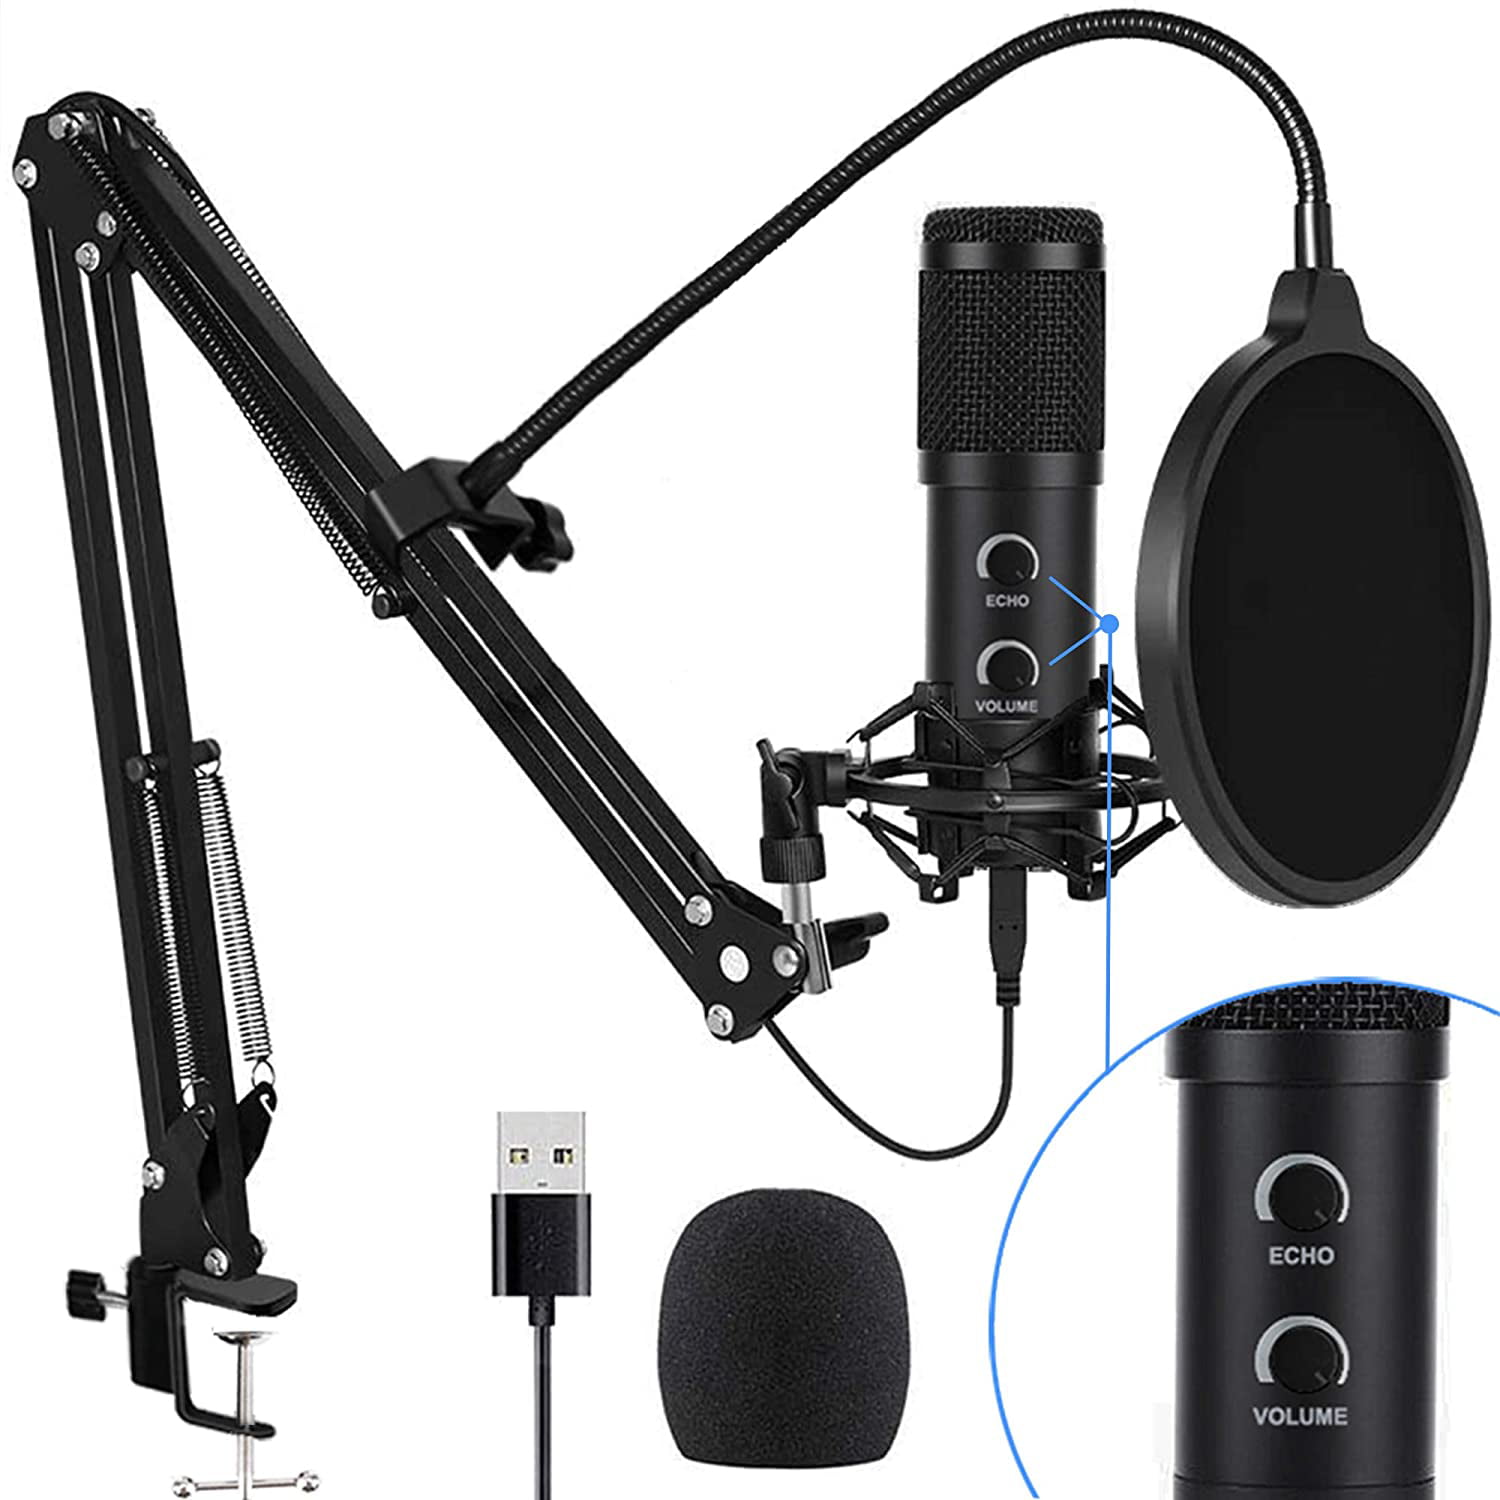 Karaoke Singing and Gaming LIONCAST UNIVERSAL Mic NEW PC USB Microphone Vocal 